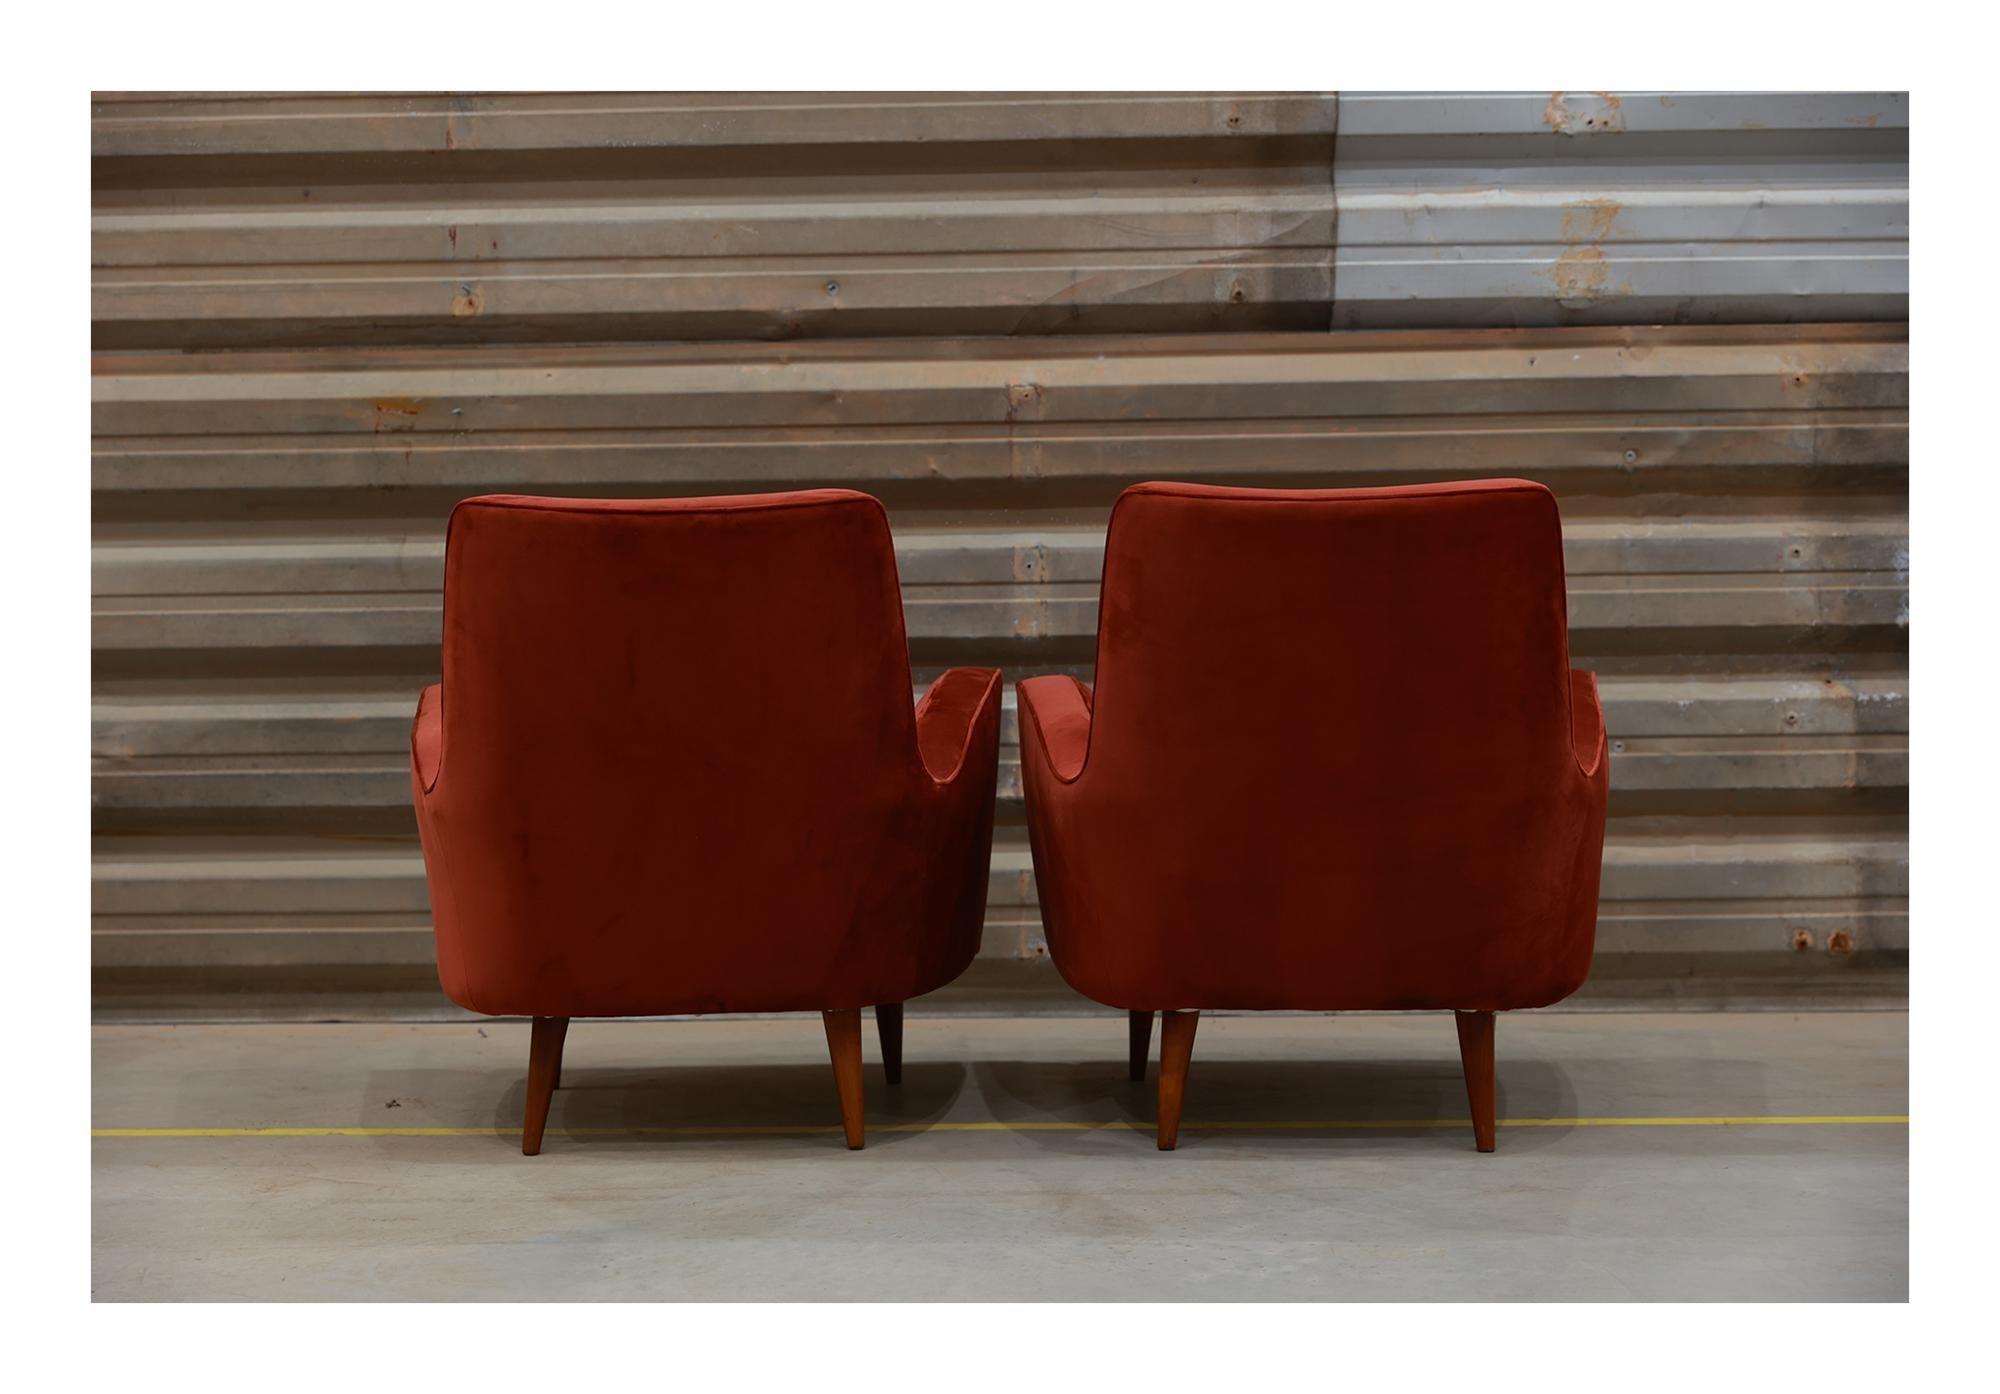 Brazilian Modern Armchair Set in Hardwood & Burgundy Fabric by Forma, 1950’s  In Good Condition For Sale In New York, NY